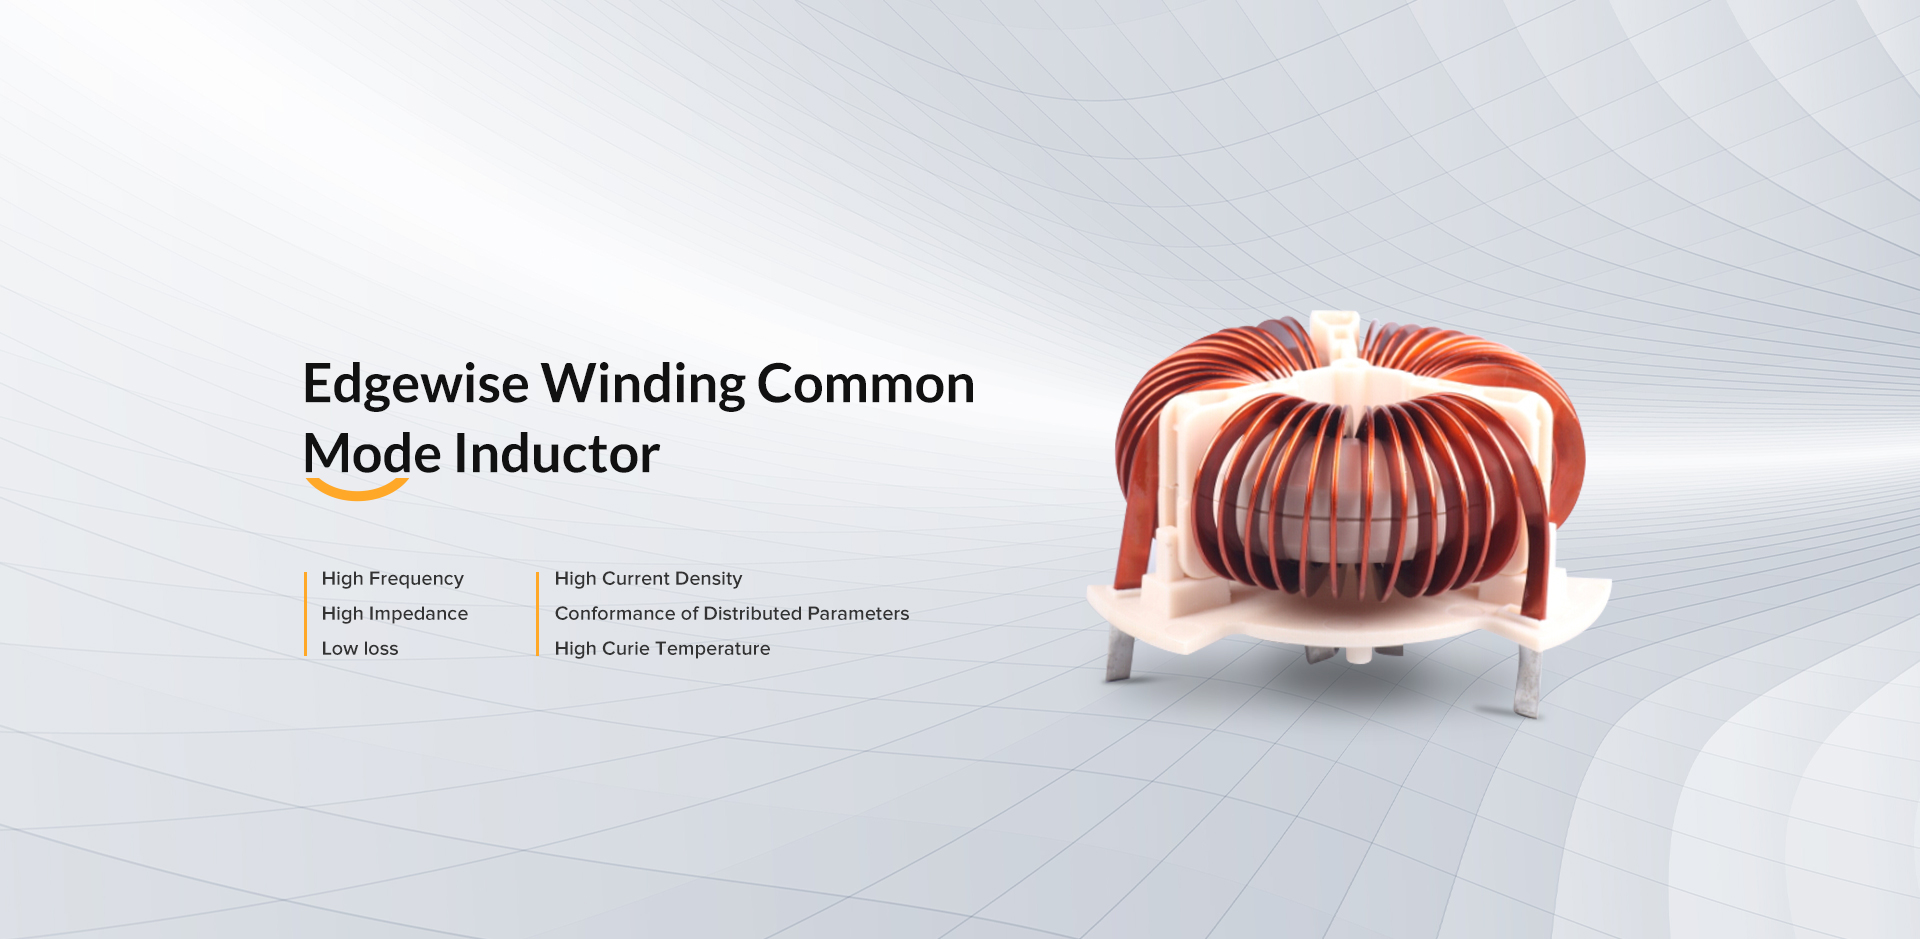 Edgewise Winding Common Mode Inductor